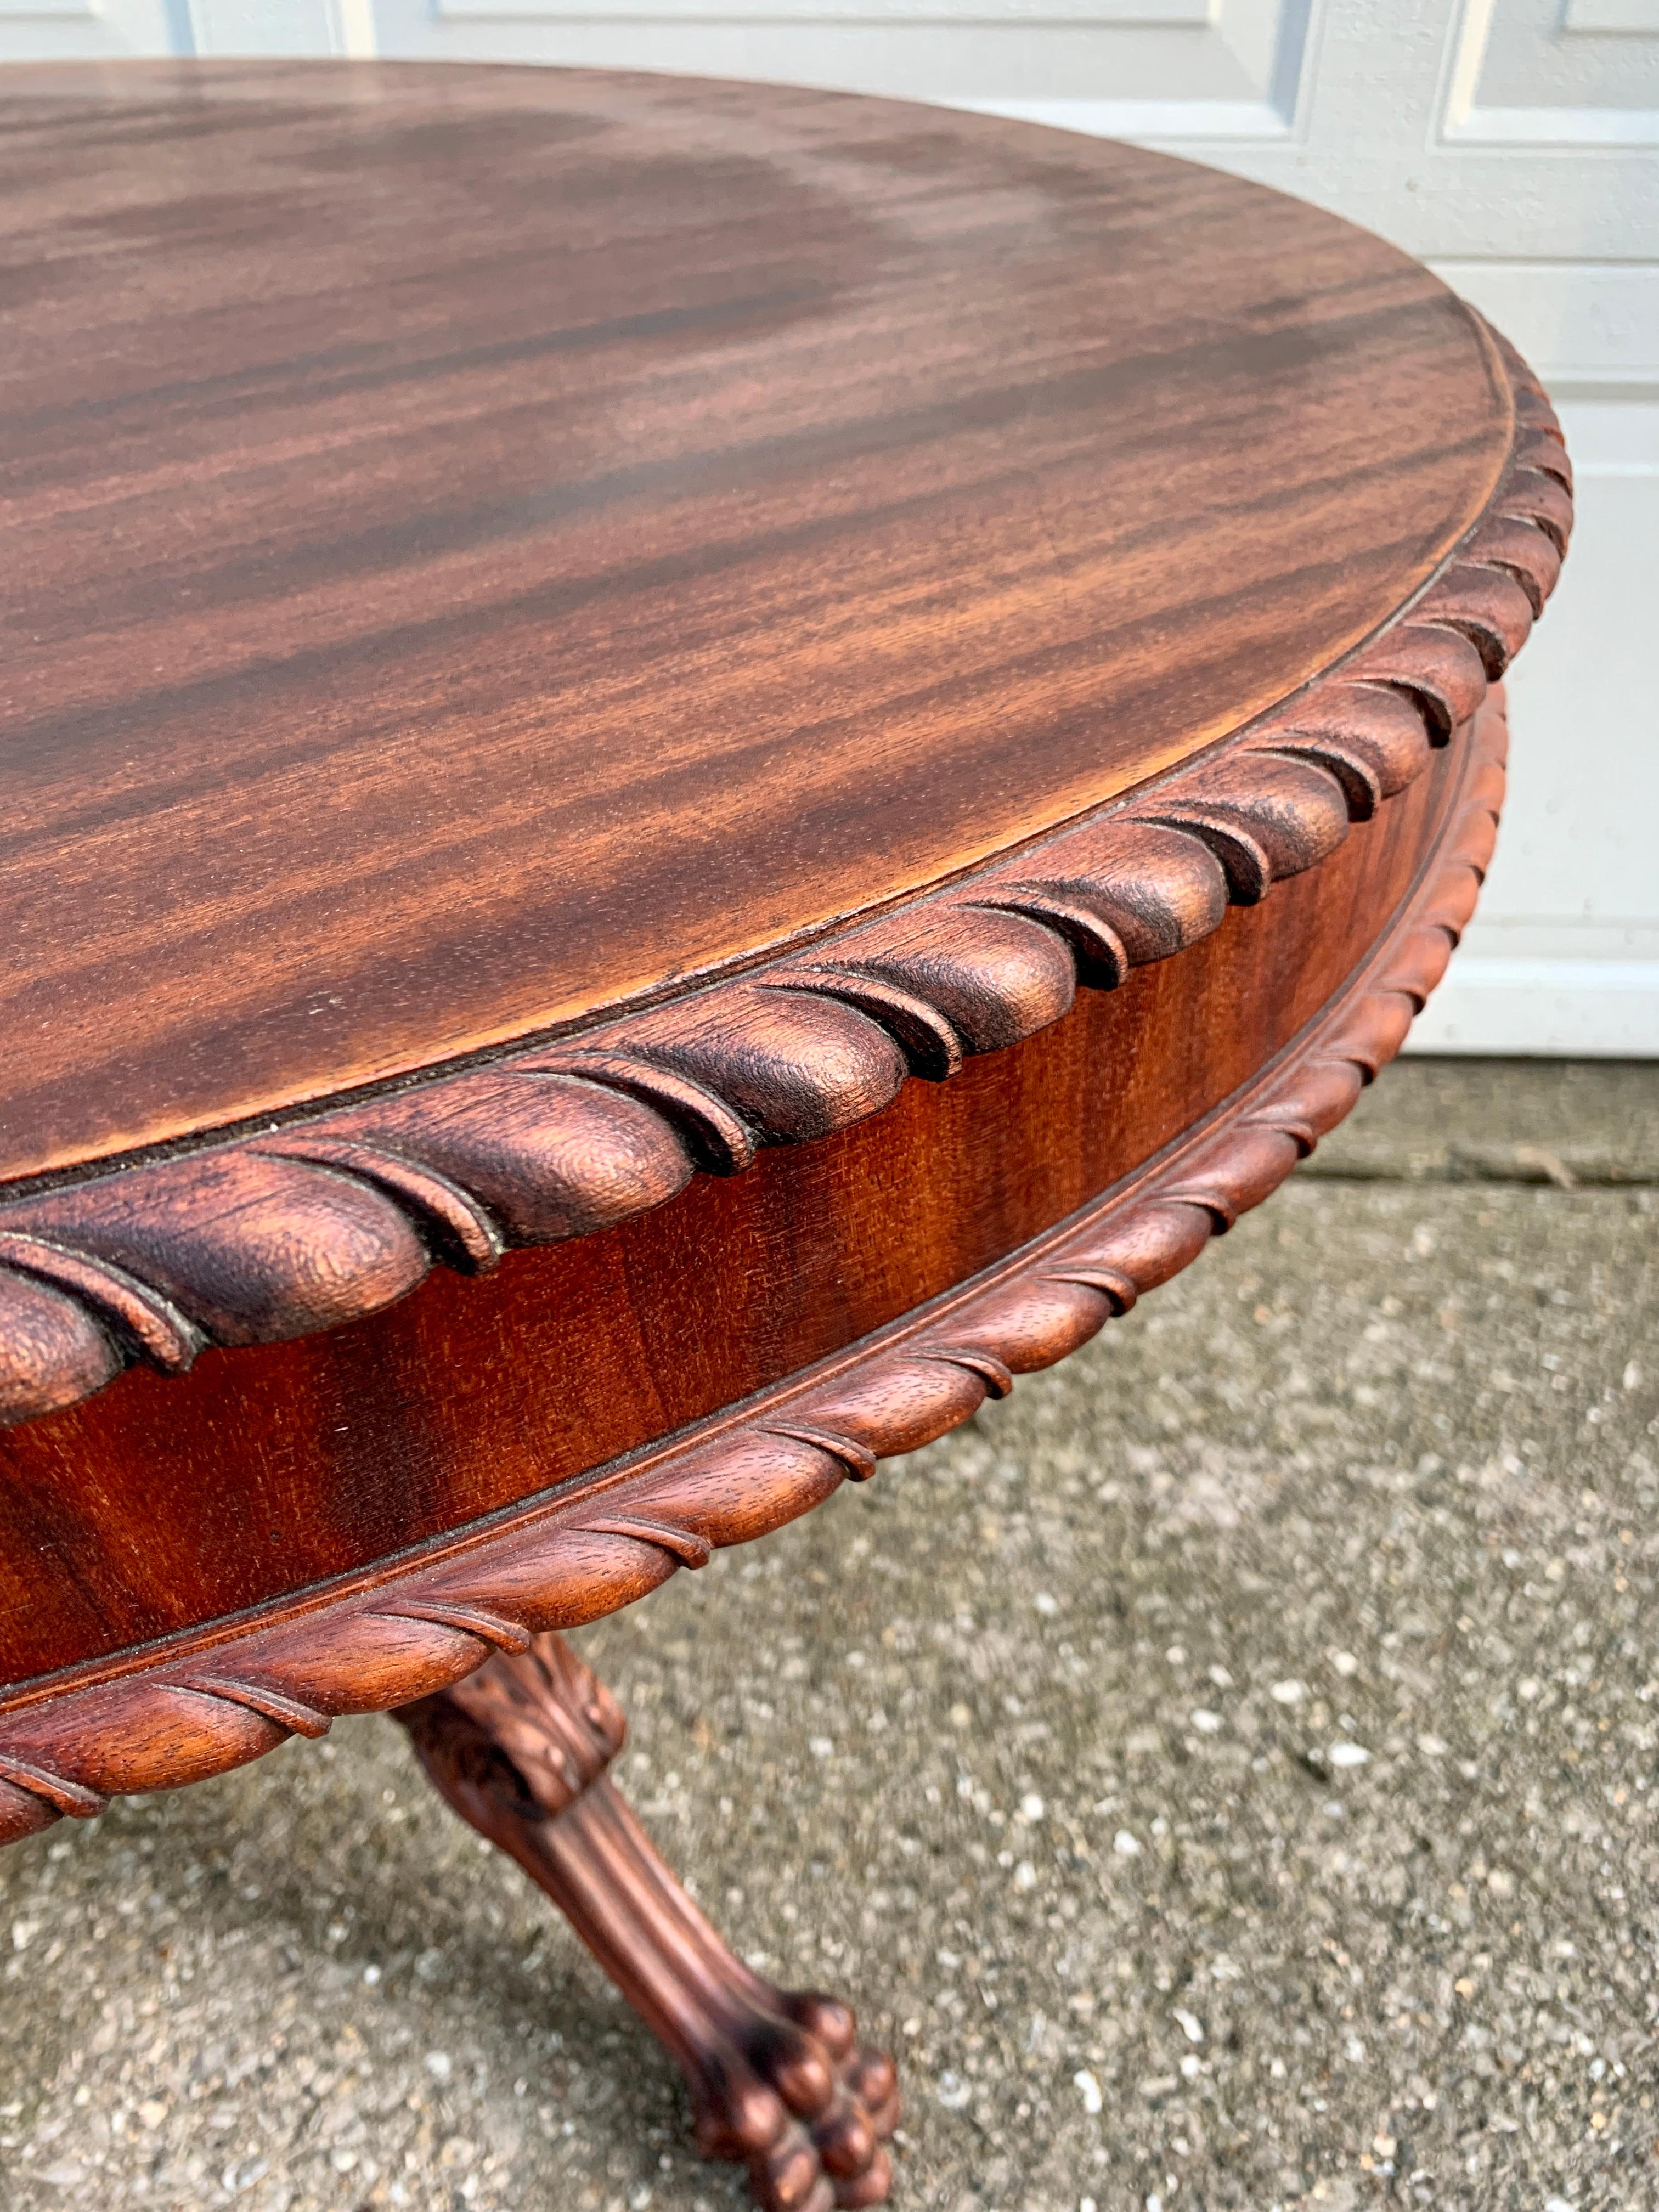 Antique American Empire Mahogany Paw Foot Pedestal Side Table, Late 19th Century For Sale 9